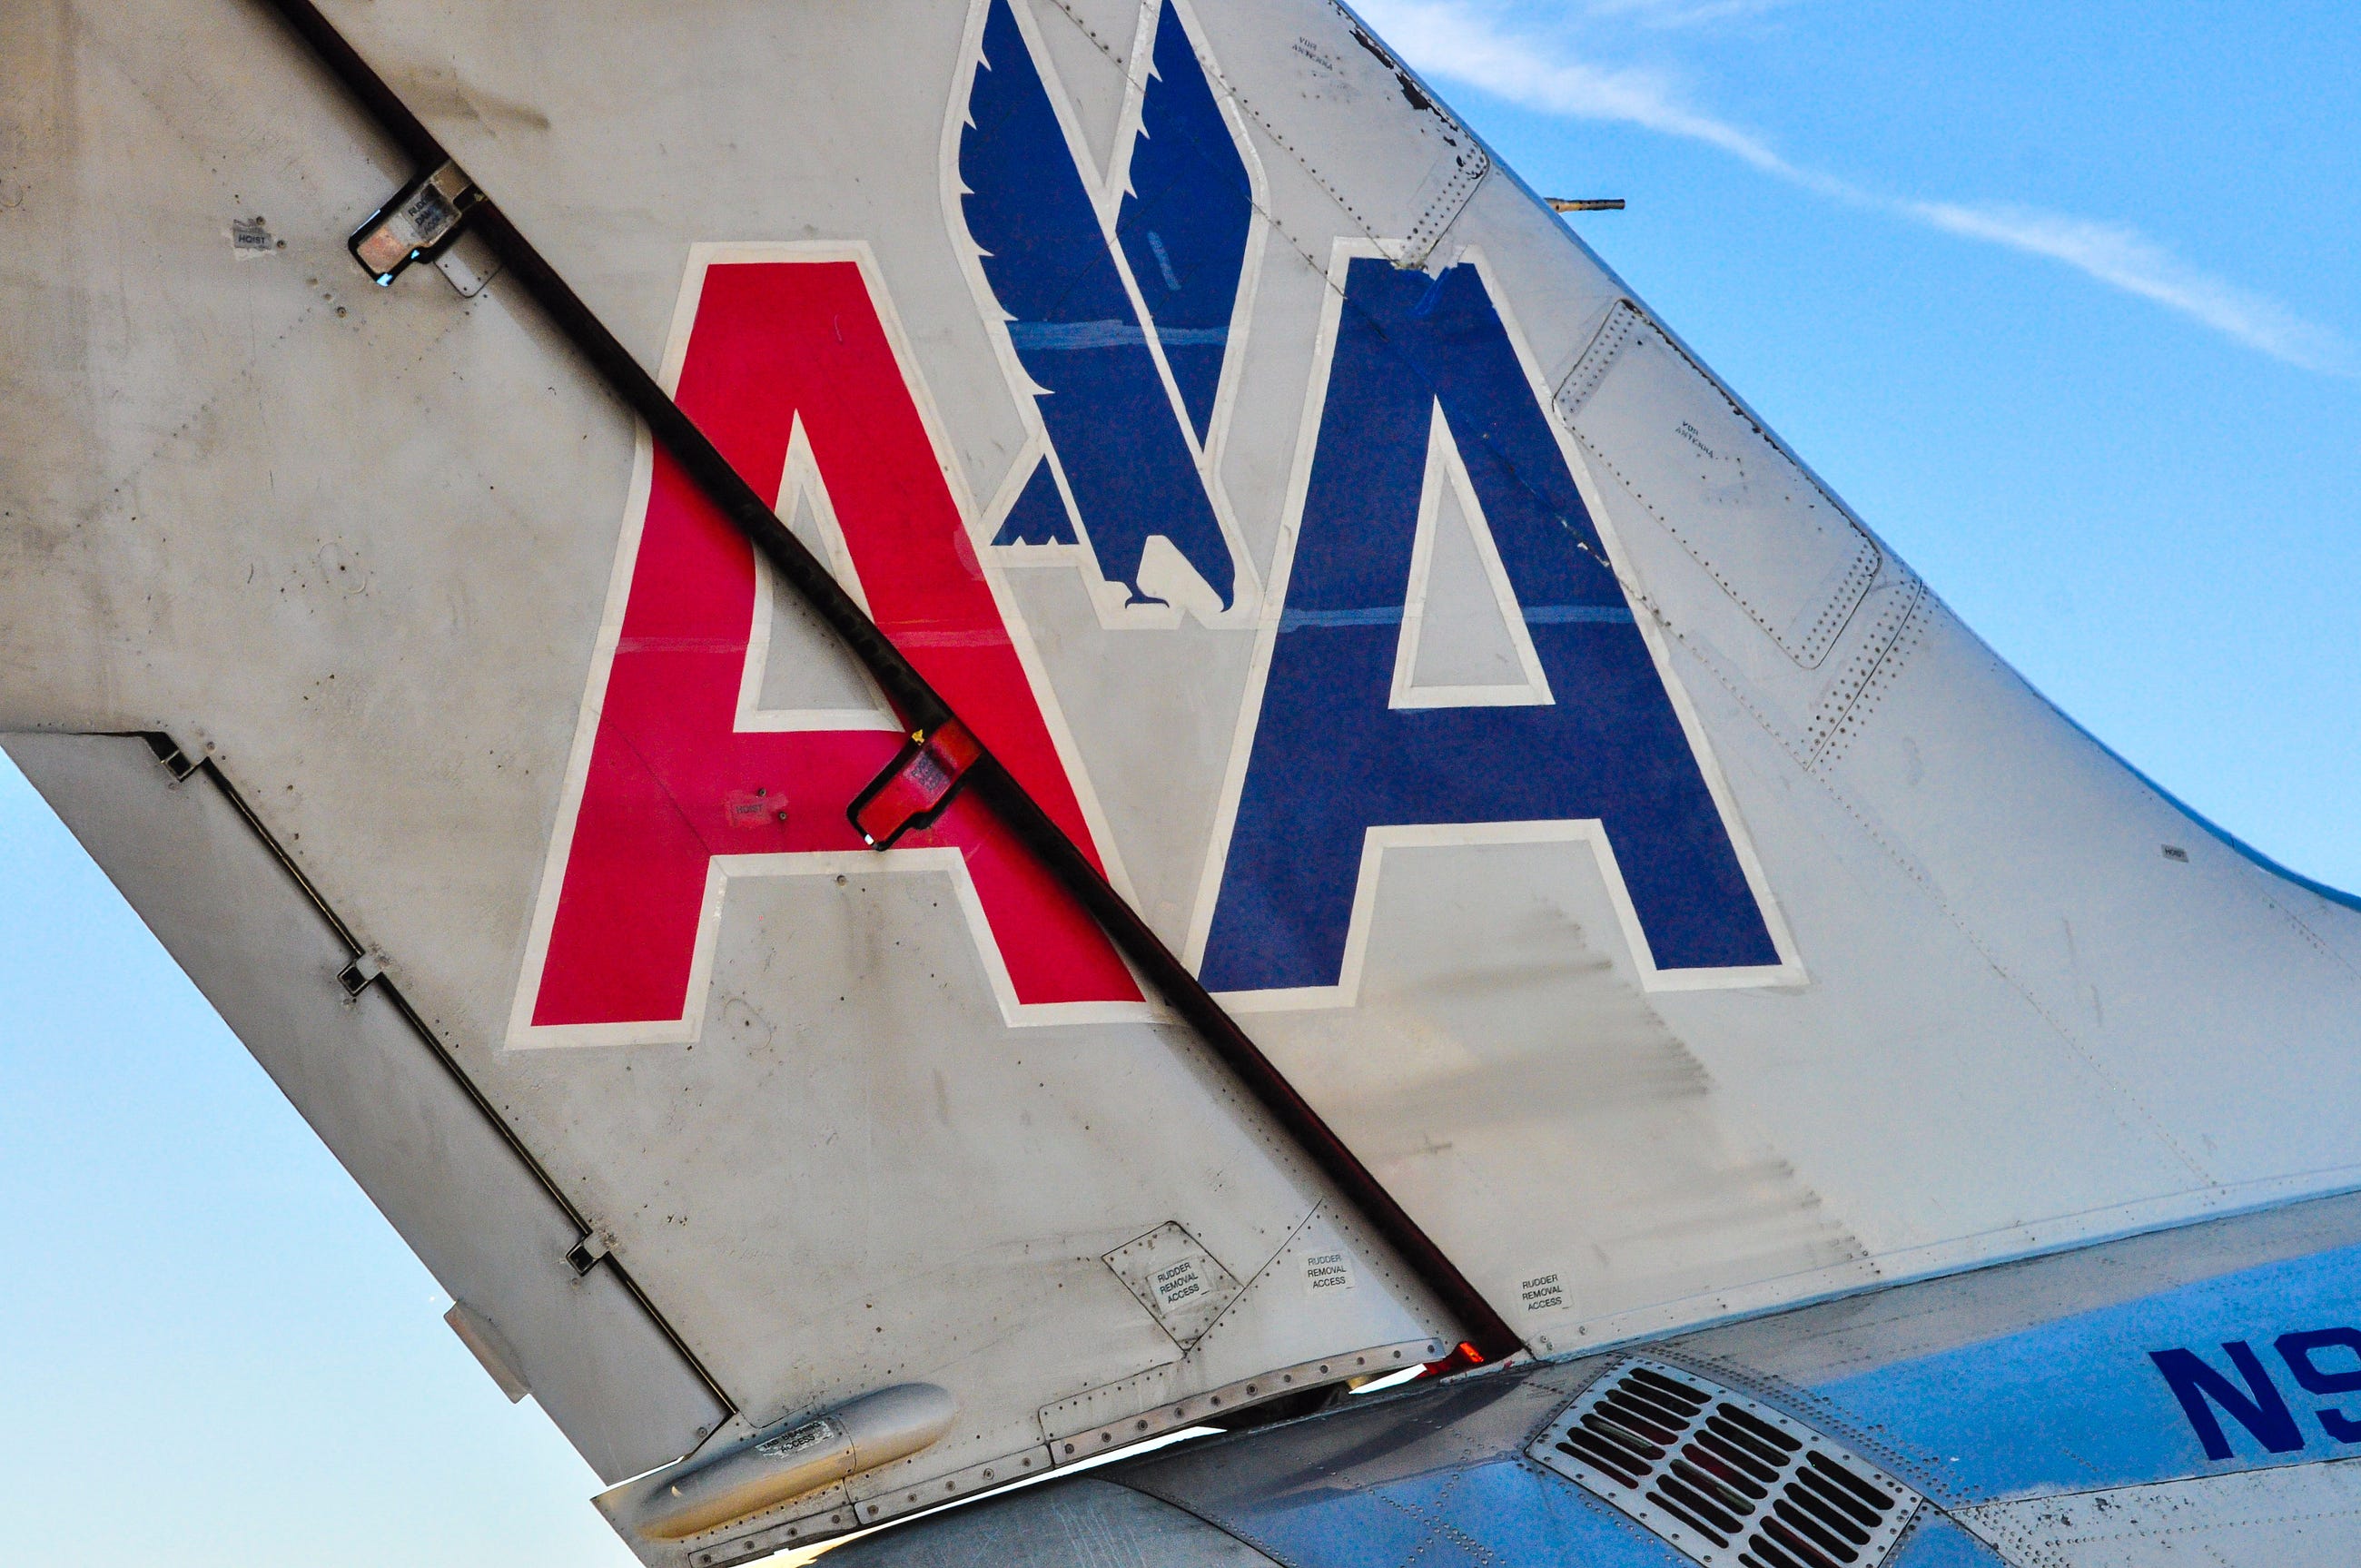 American Airlines wants to rollback nearly 150 years of civil rights …